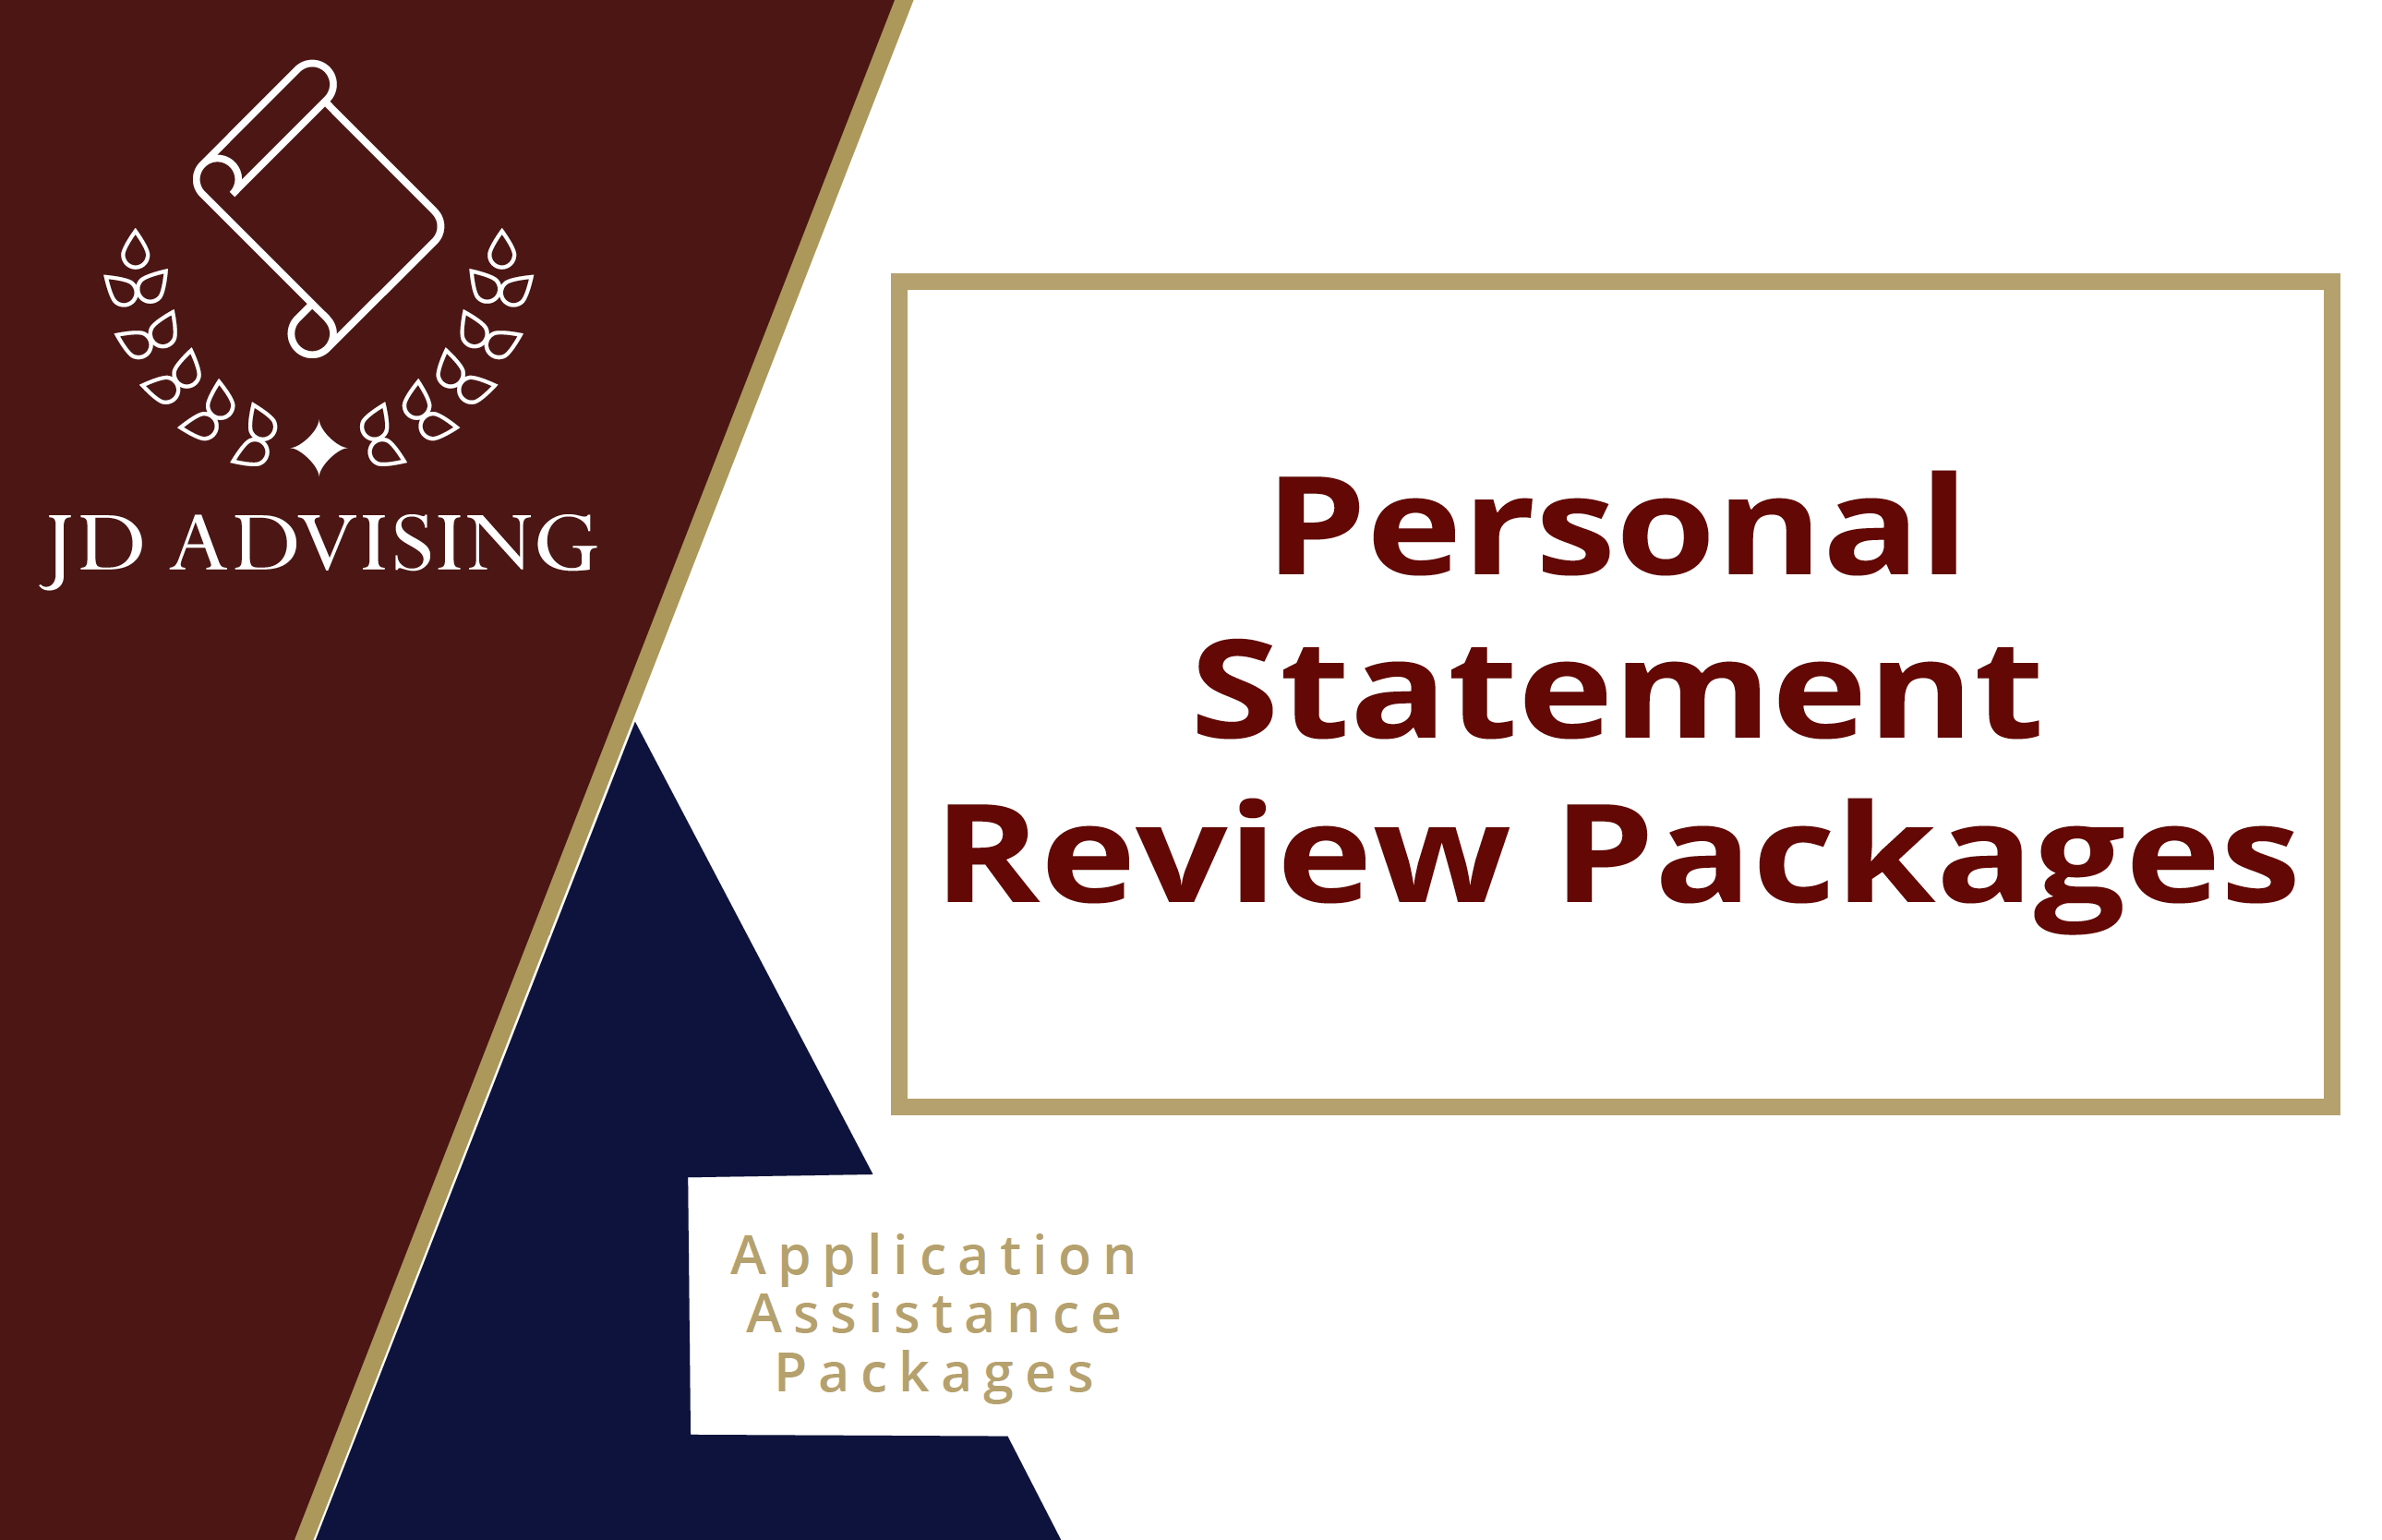 Personal Statement Review Packages